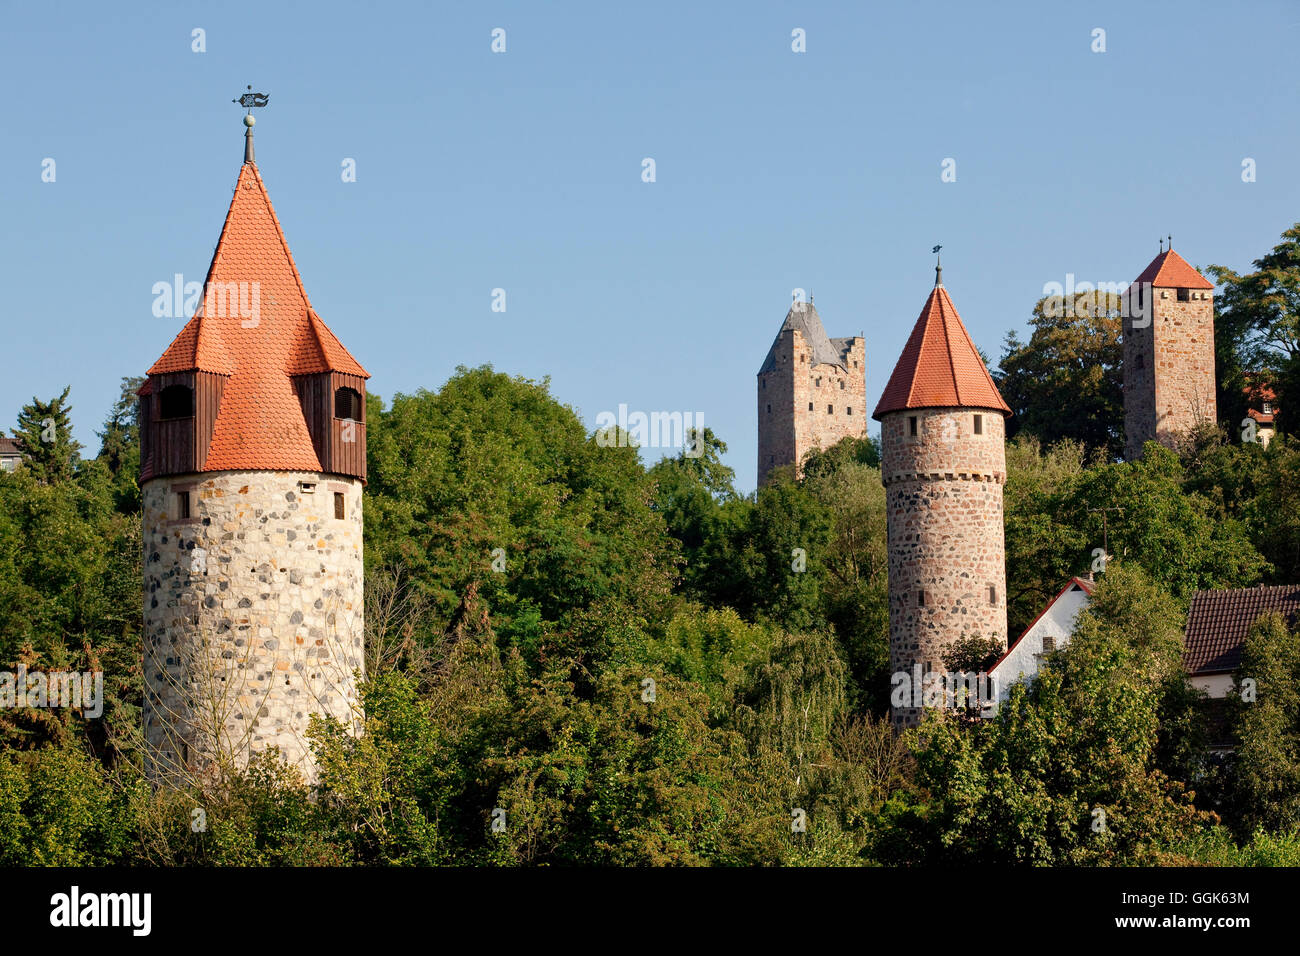 View of four towers from Vier Türme Blick viewpoint, Fritzlar, Hesse, Germany, Europe Stock Photo